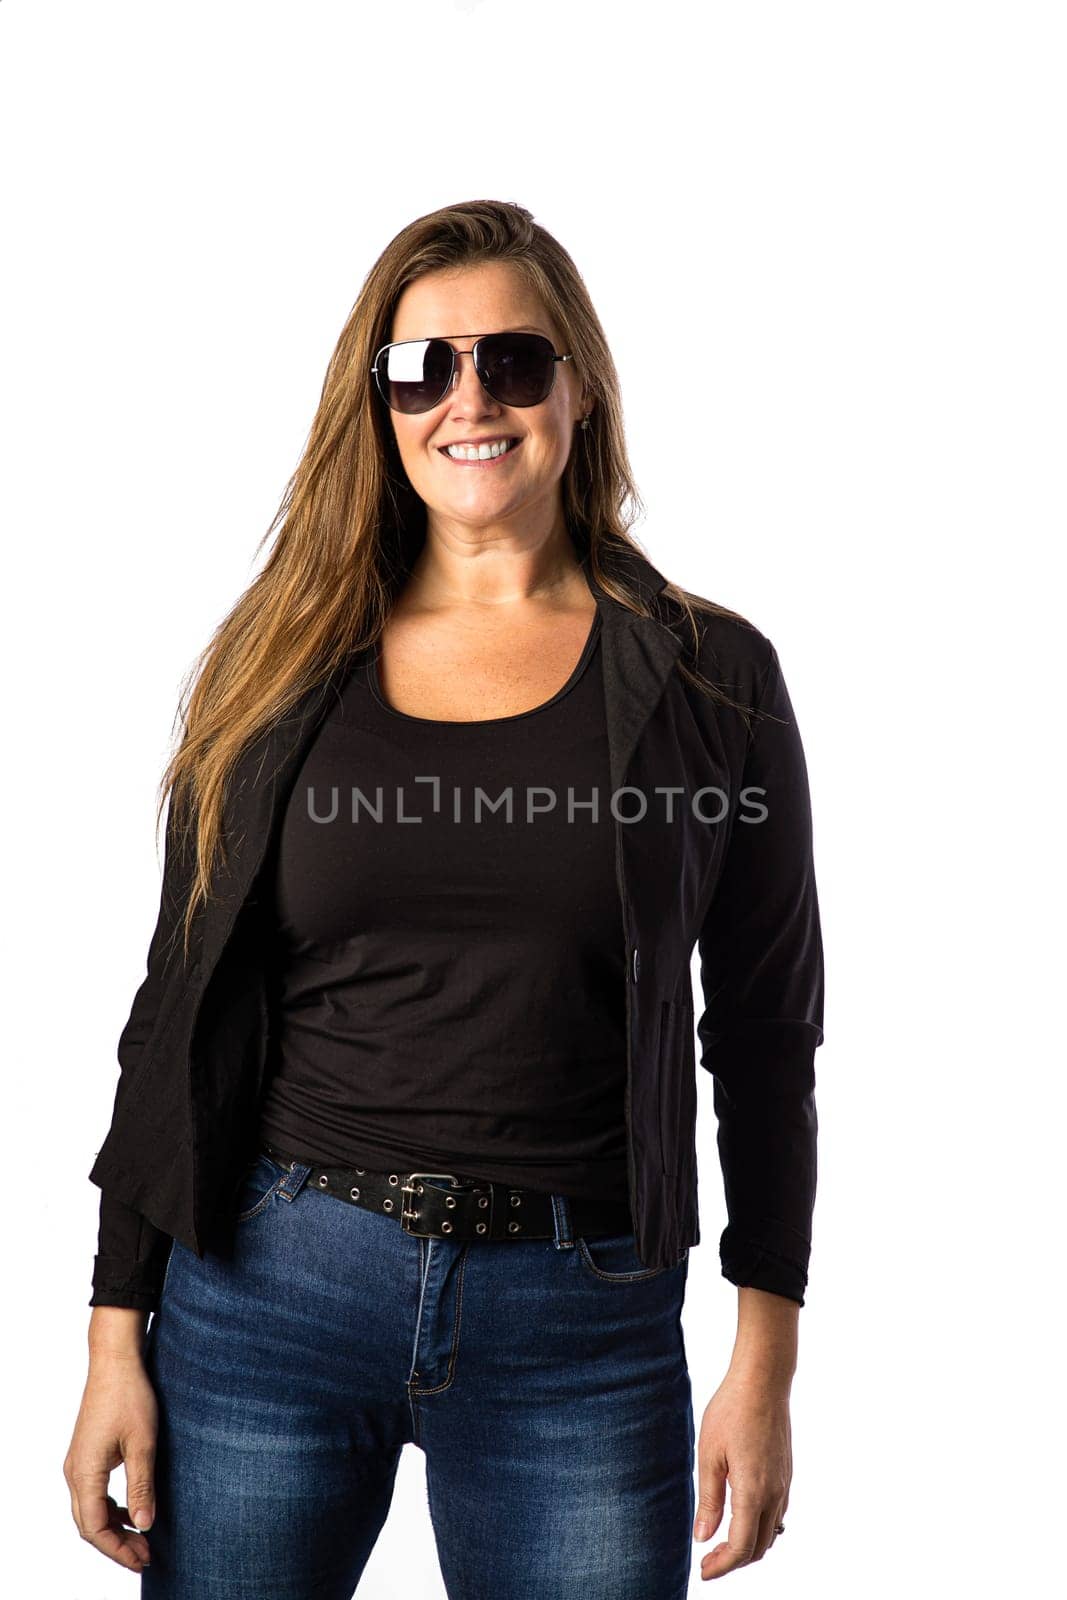 Forty year old woman with sunglasses by mypstudio